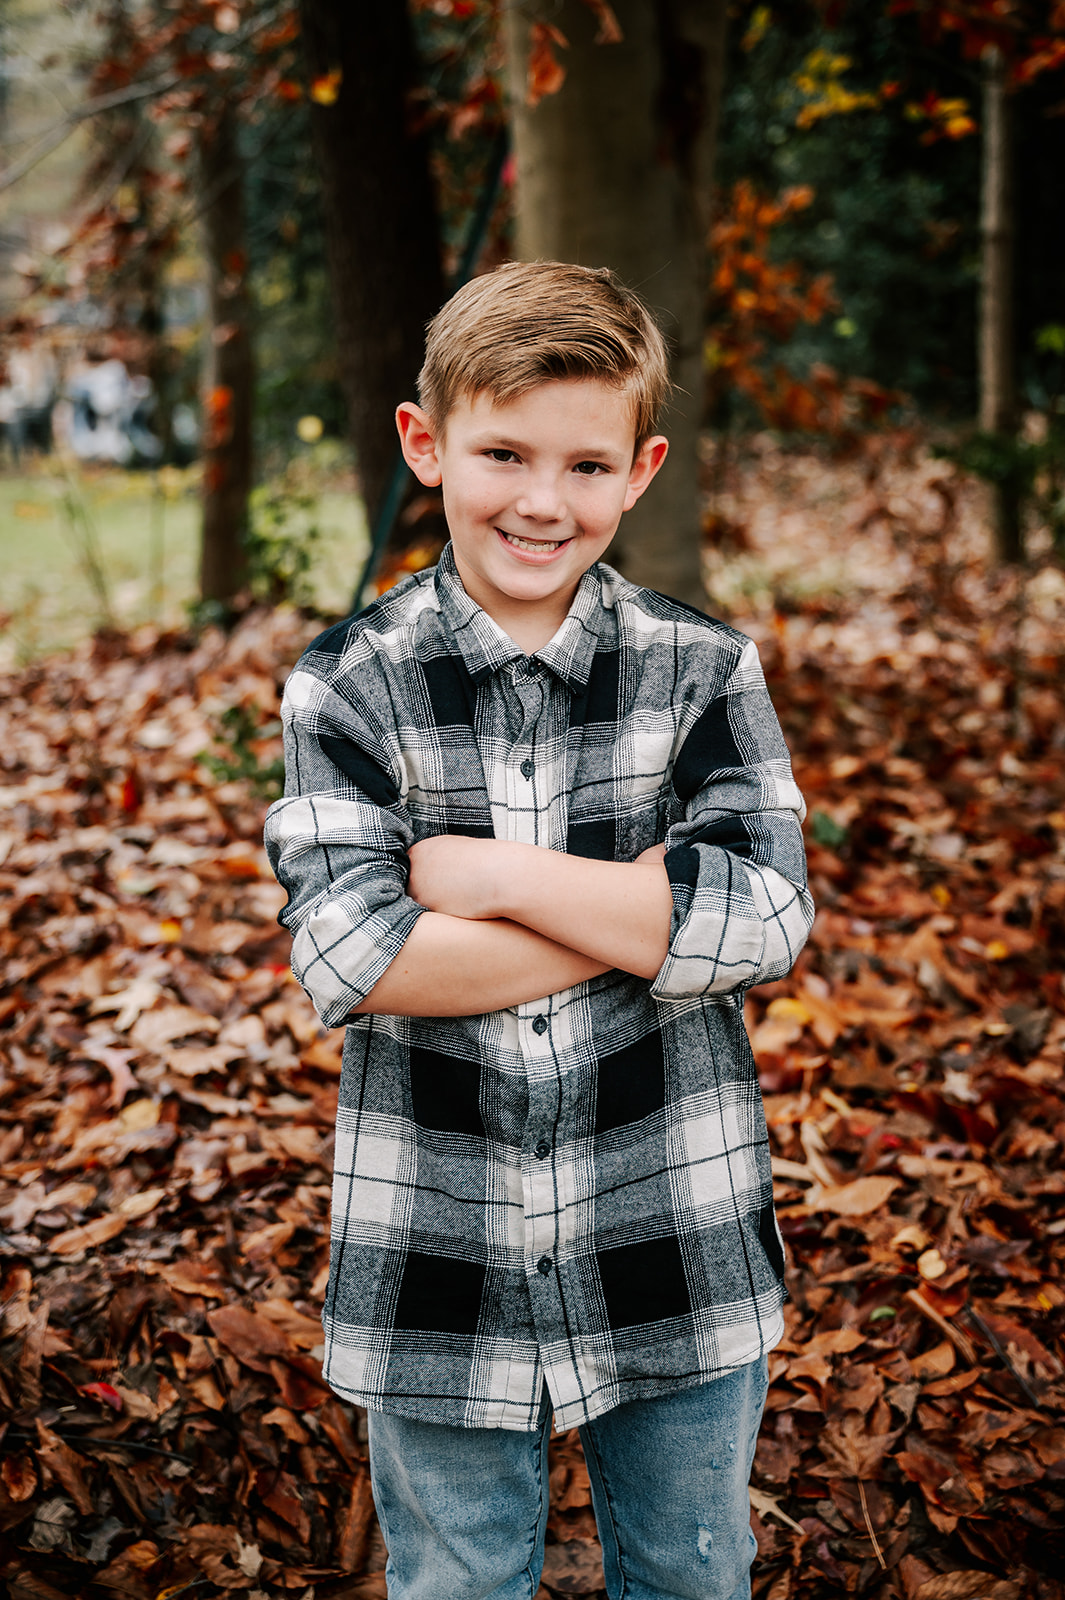 A young boy folds his arms standing in a flannel shirt and jeans in a park